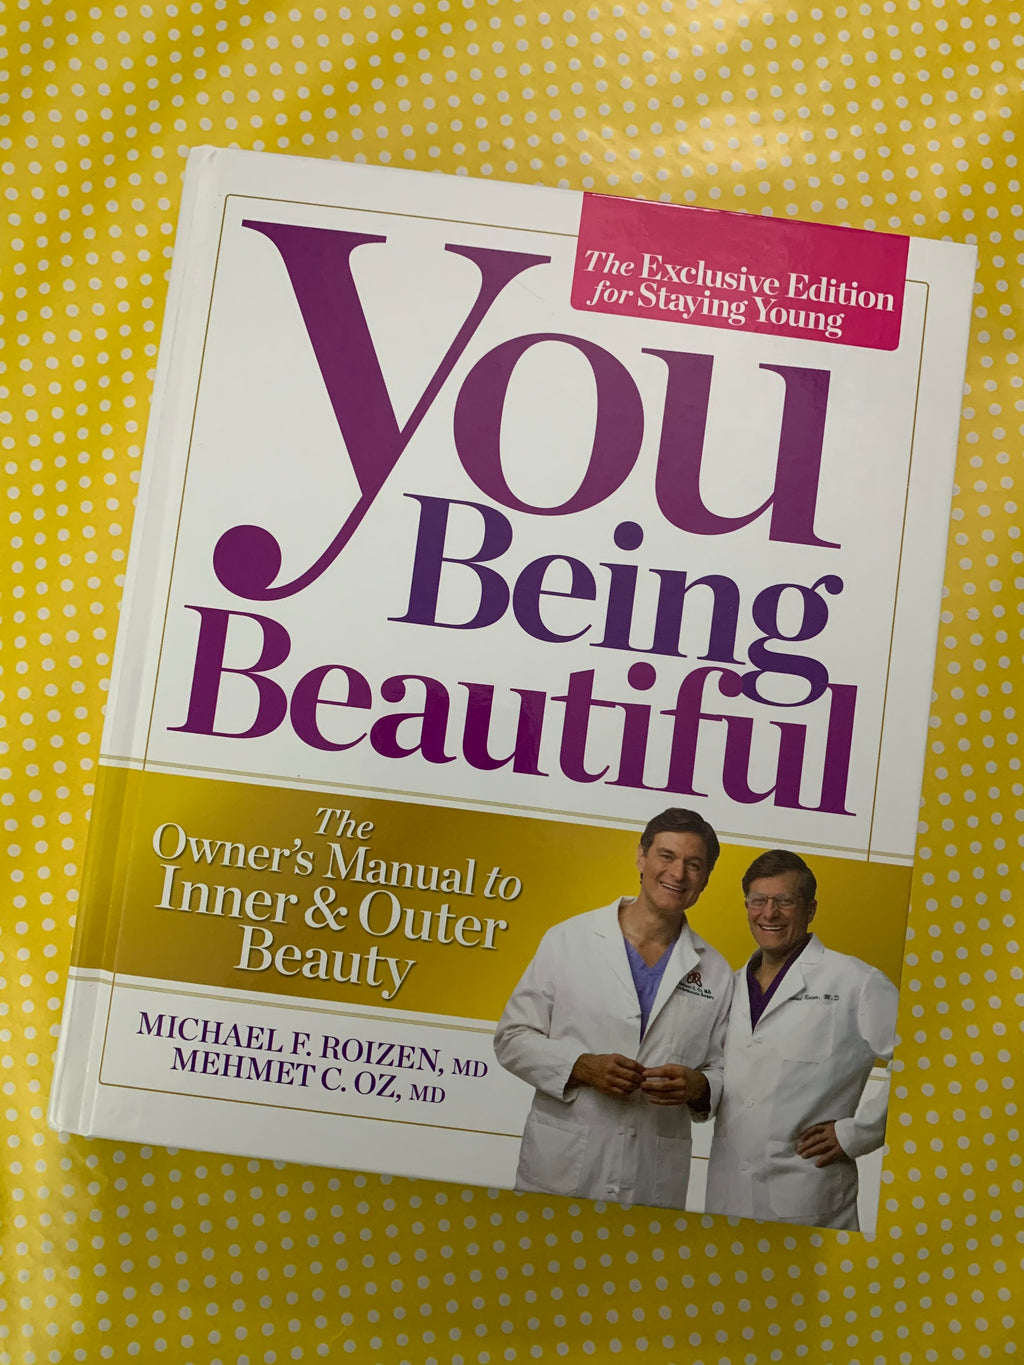 You Being Beautiful: The Owner's Manual to Inner & Outer Beauty- By Michael F. Roizen, MD and Mehmet C. Oz, MD